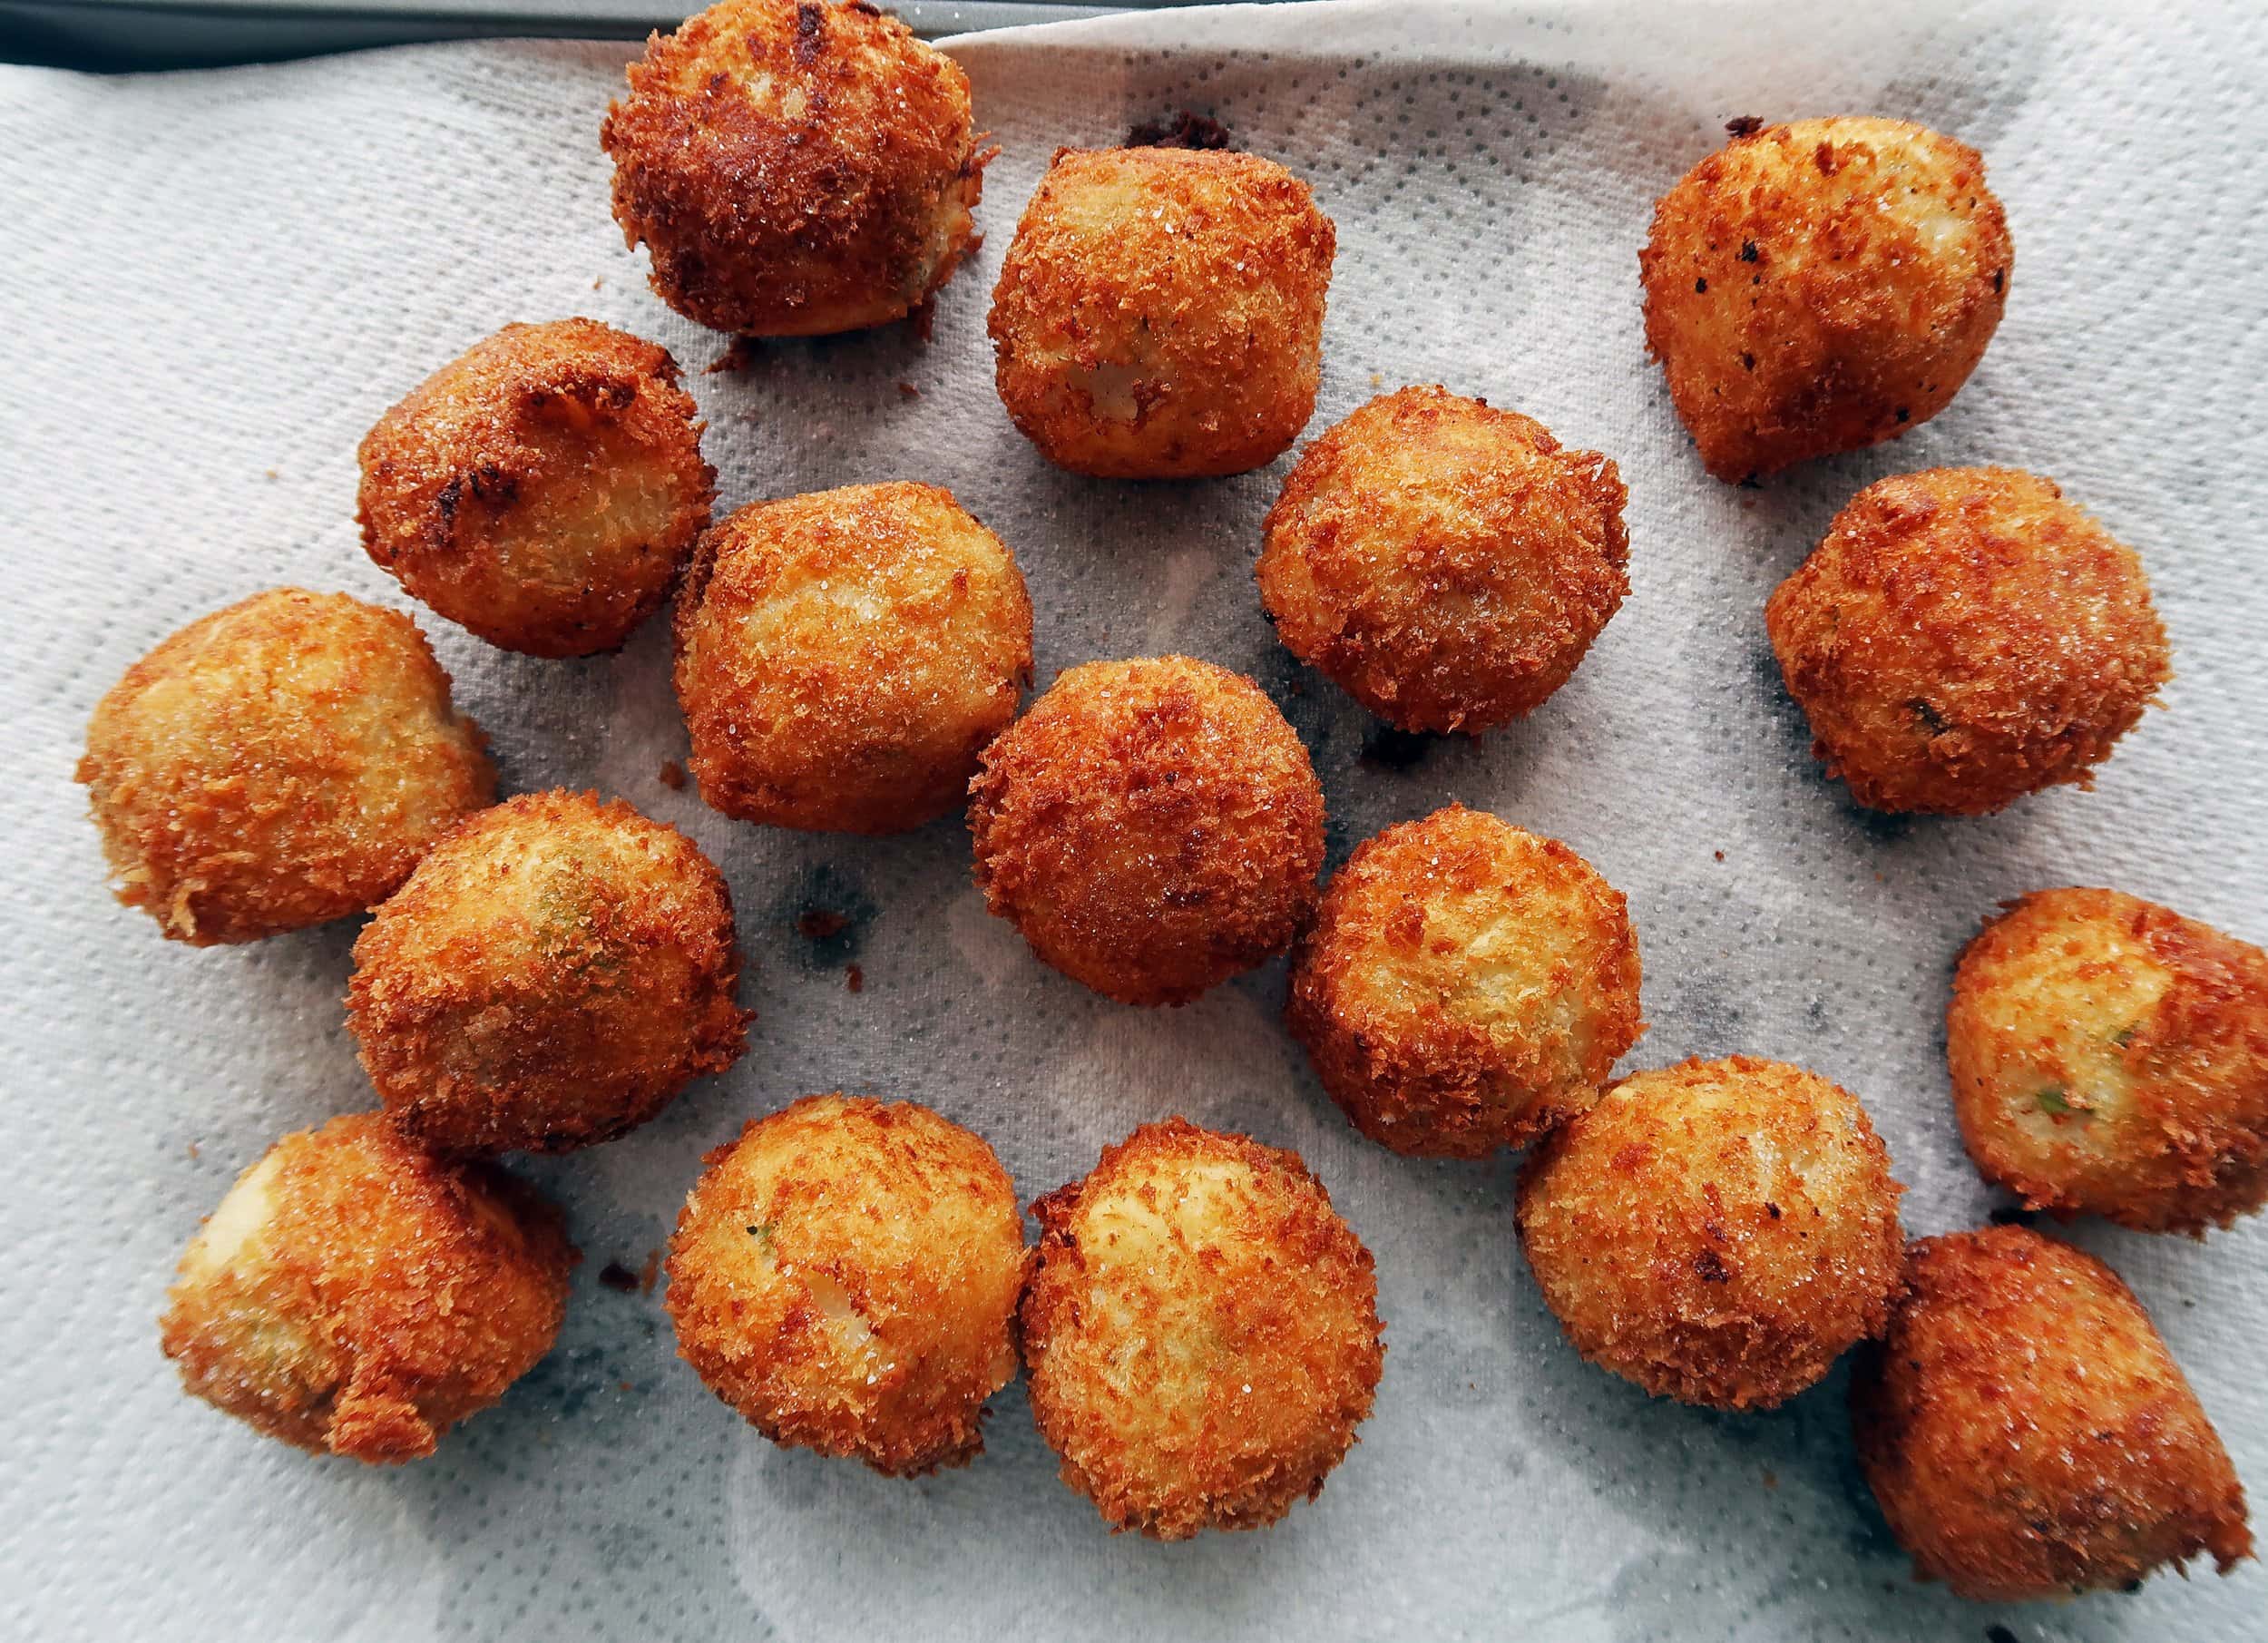 Crispy mashed potato cheese balls cooling on a paper towel.